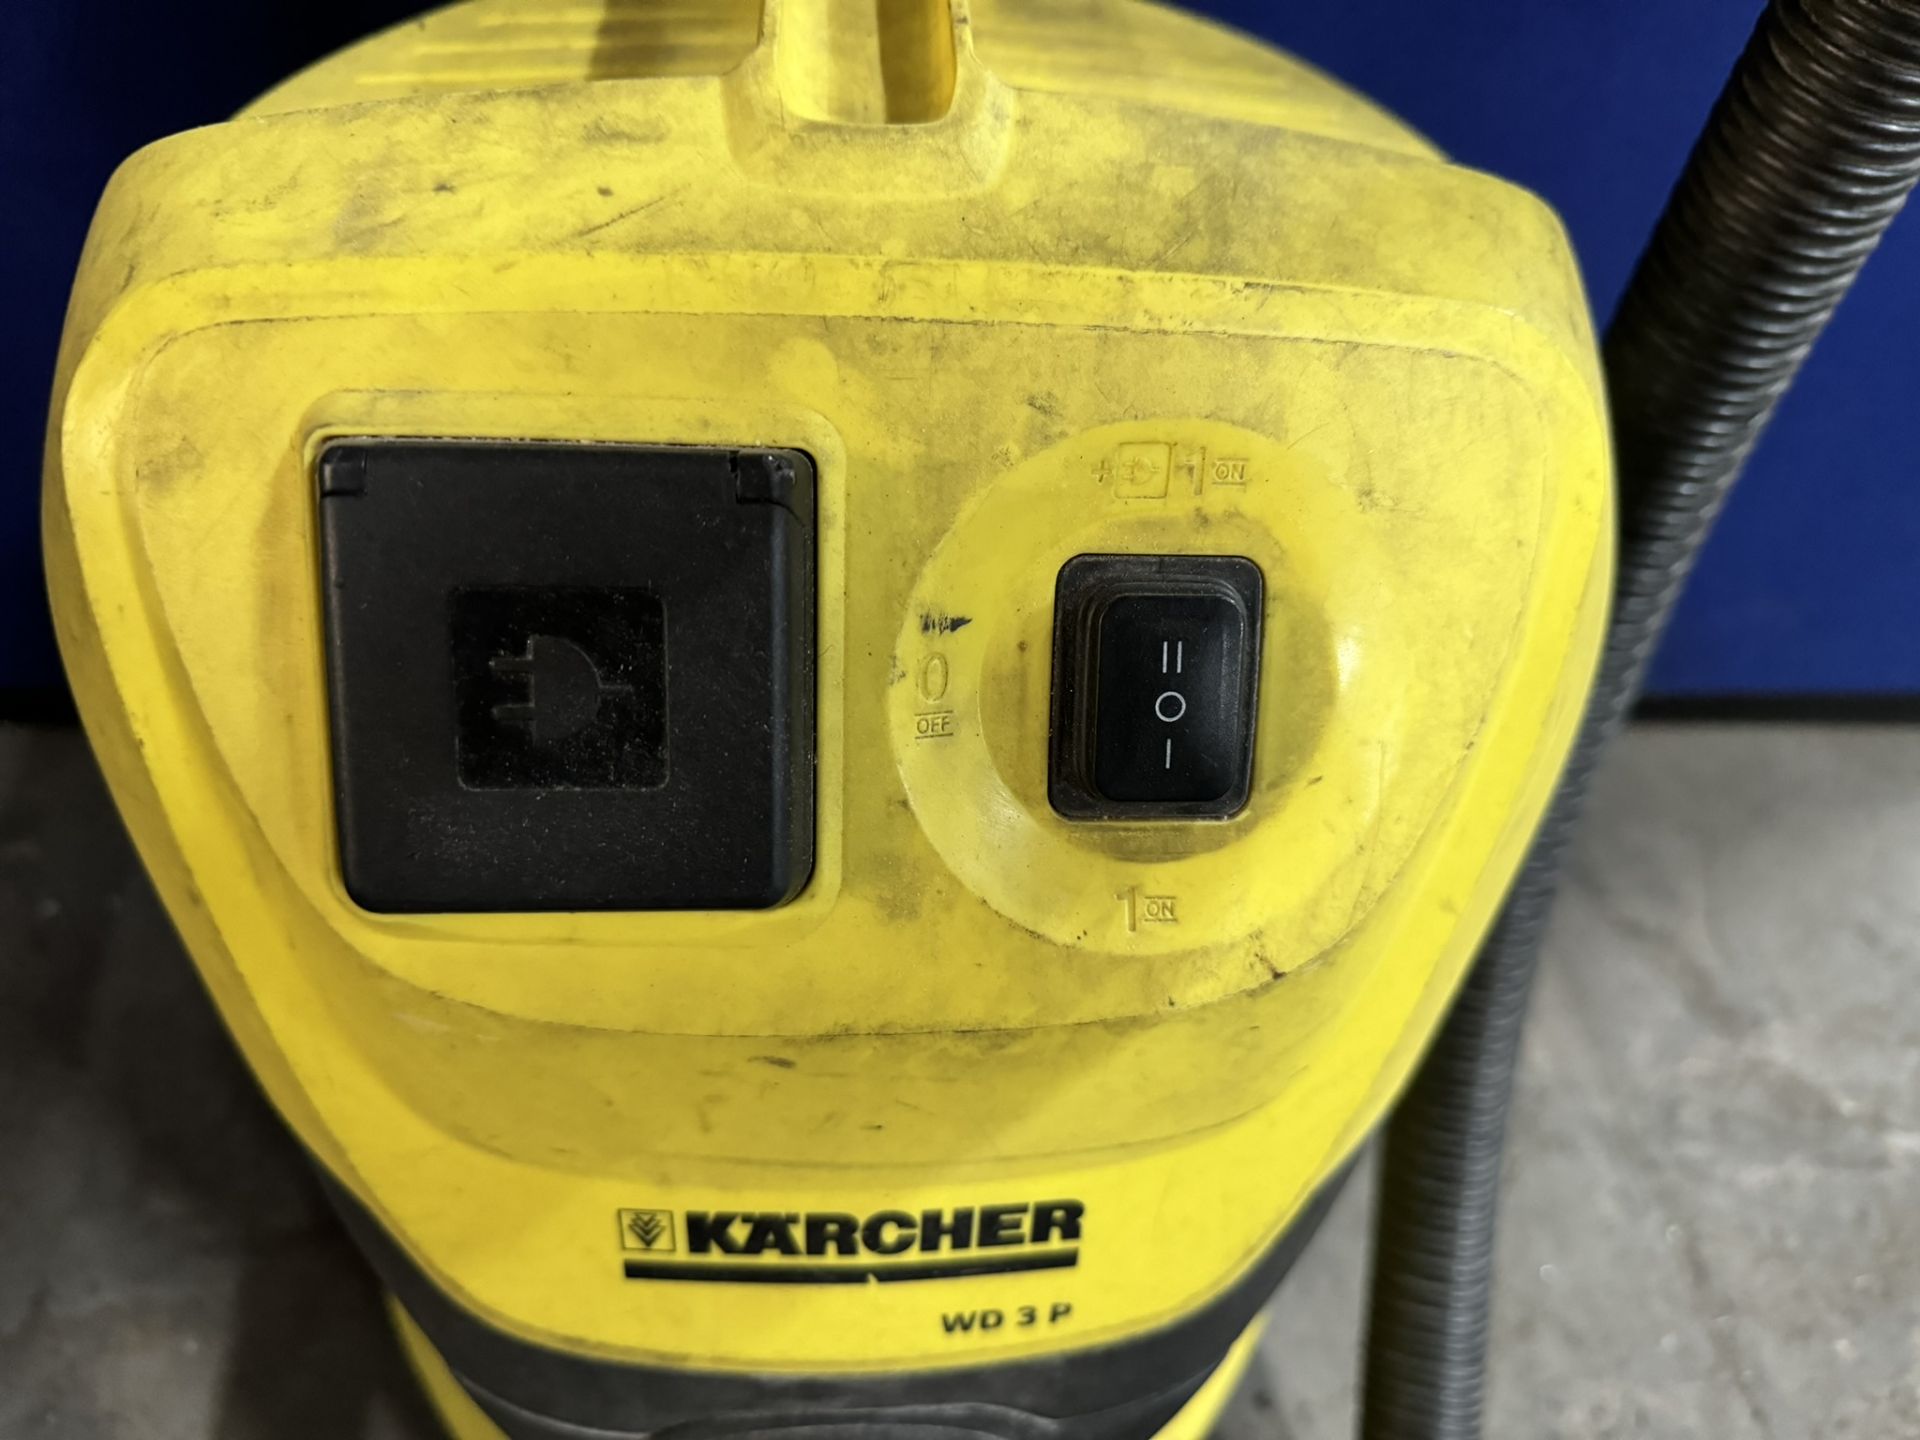 Karcher WD3P Cylinder Wet and Dry Vacuum Cleaner - Image 3 of 5